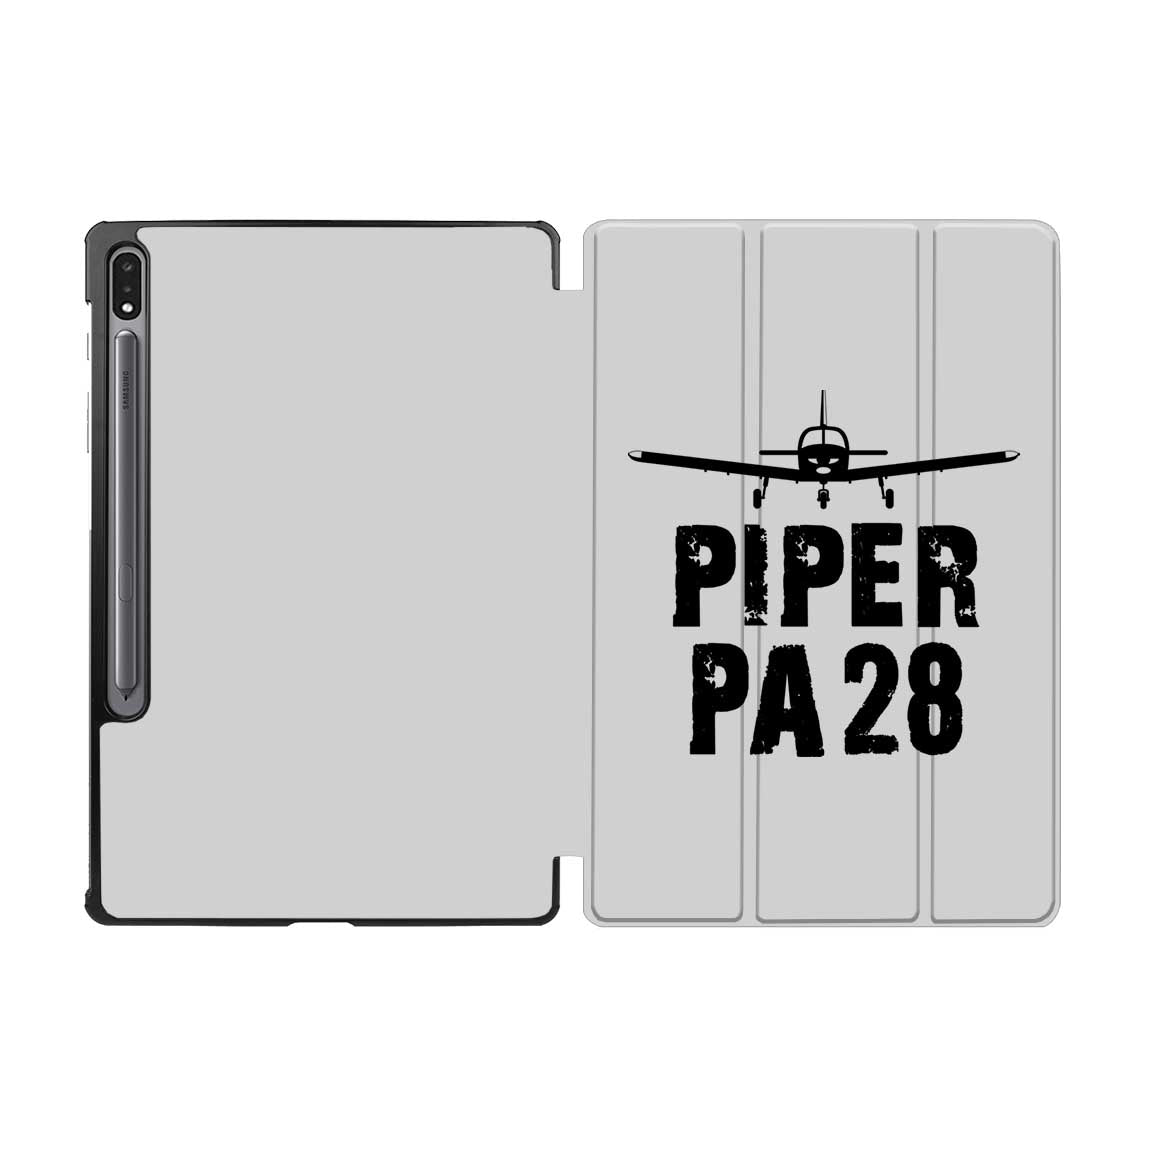 Piper PA28 & Plane Designed Samsung Tablet Cases